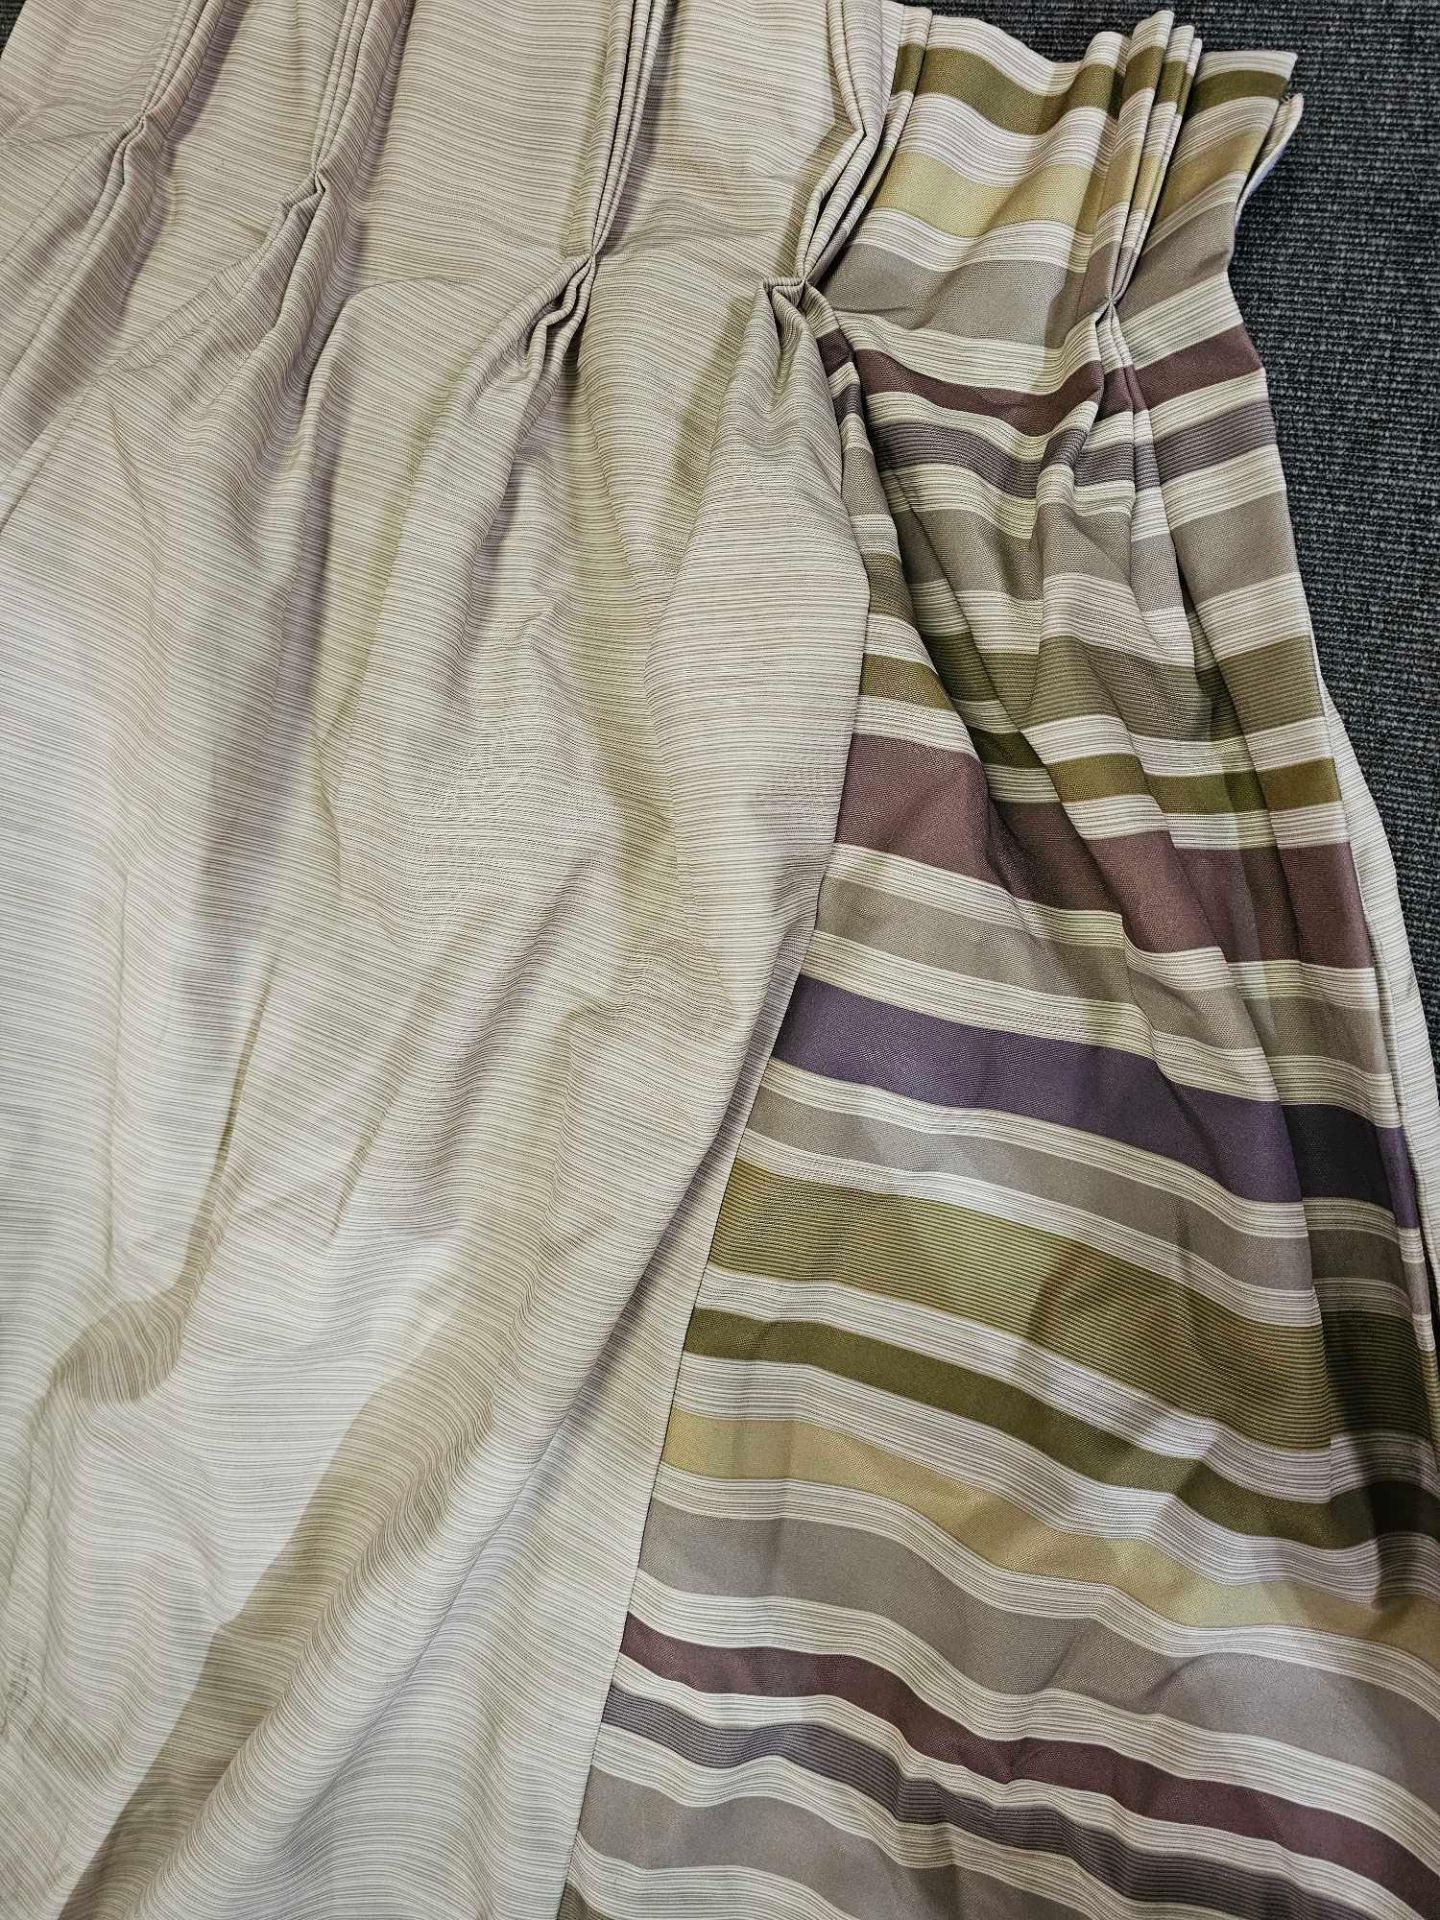 A Pair Of Curtains Striped Edge Purple/Green/Beige/Lime/Brown Size 284 x 250cm ( Ref Red 164) - Image 2 of 2